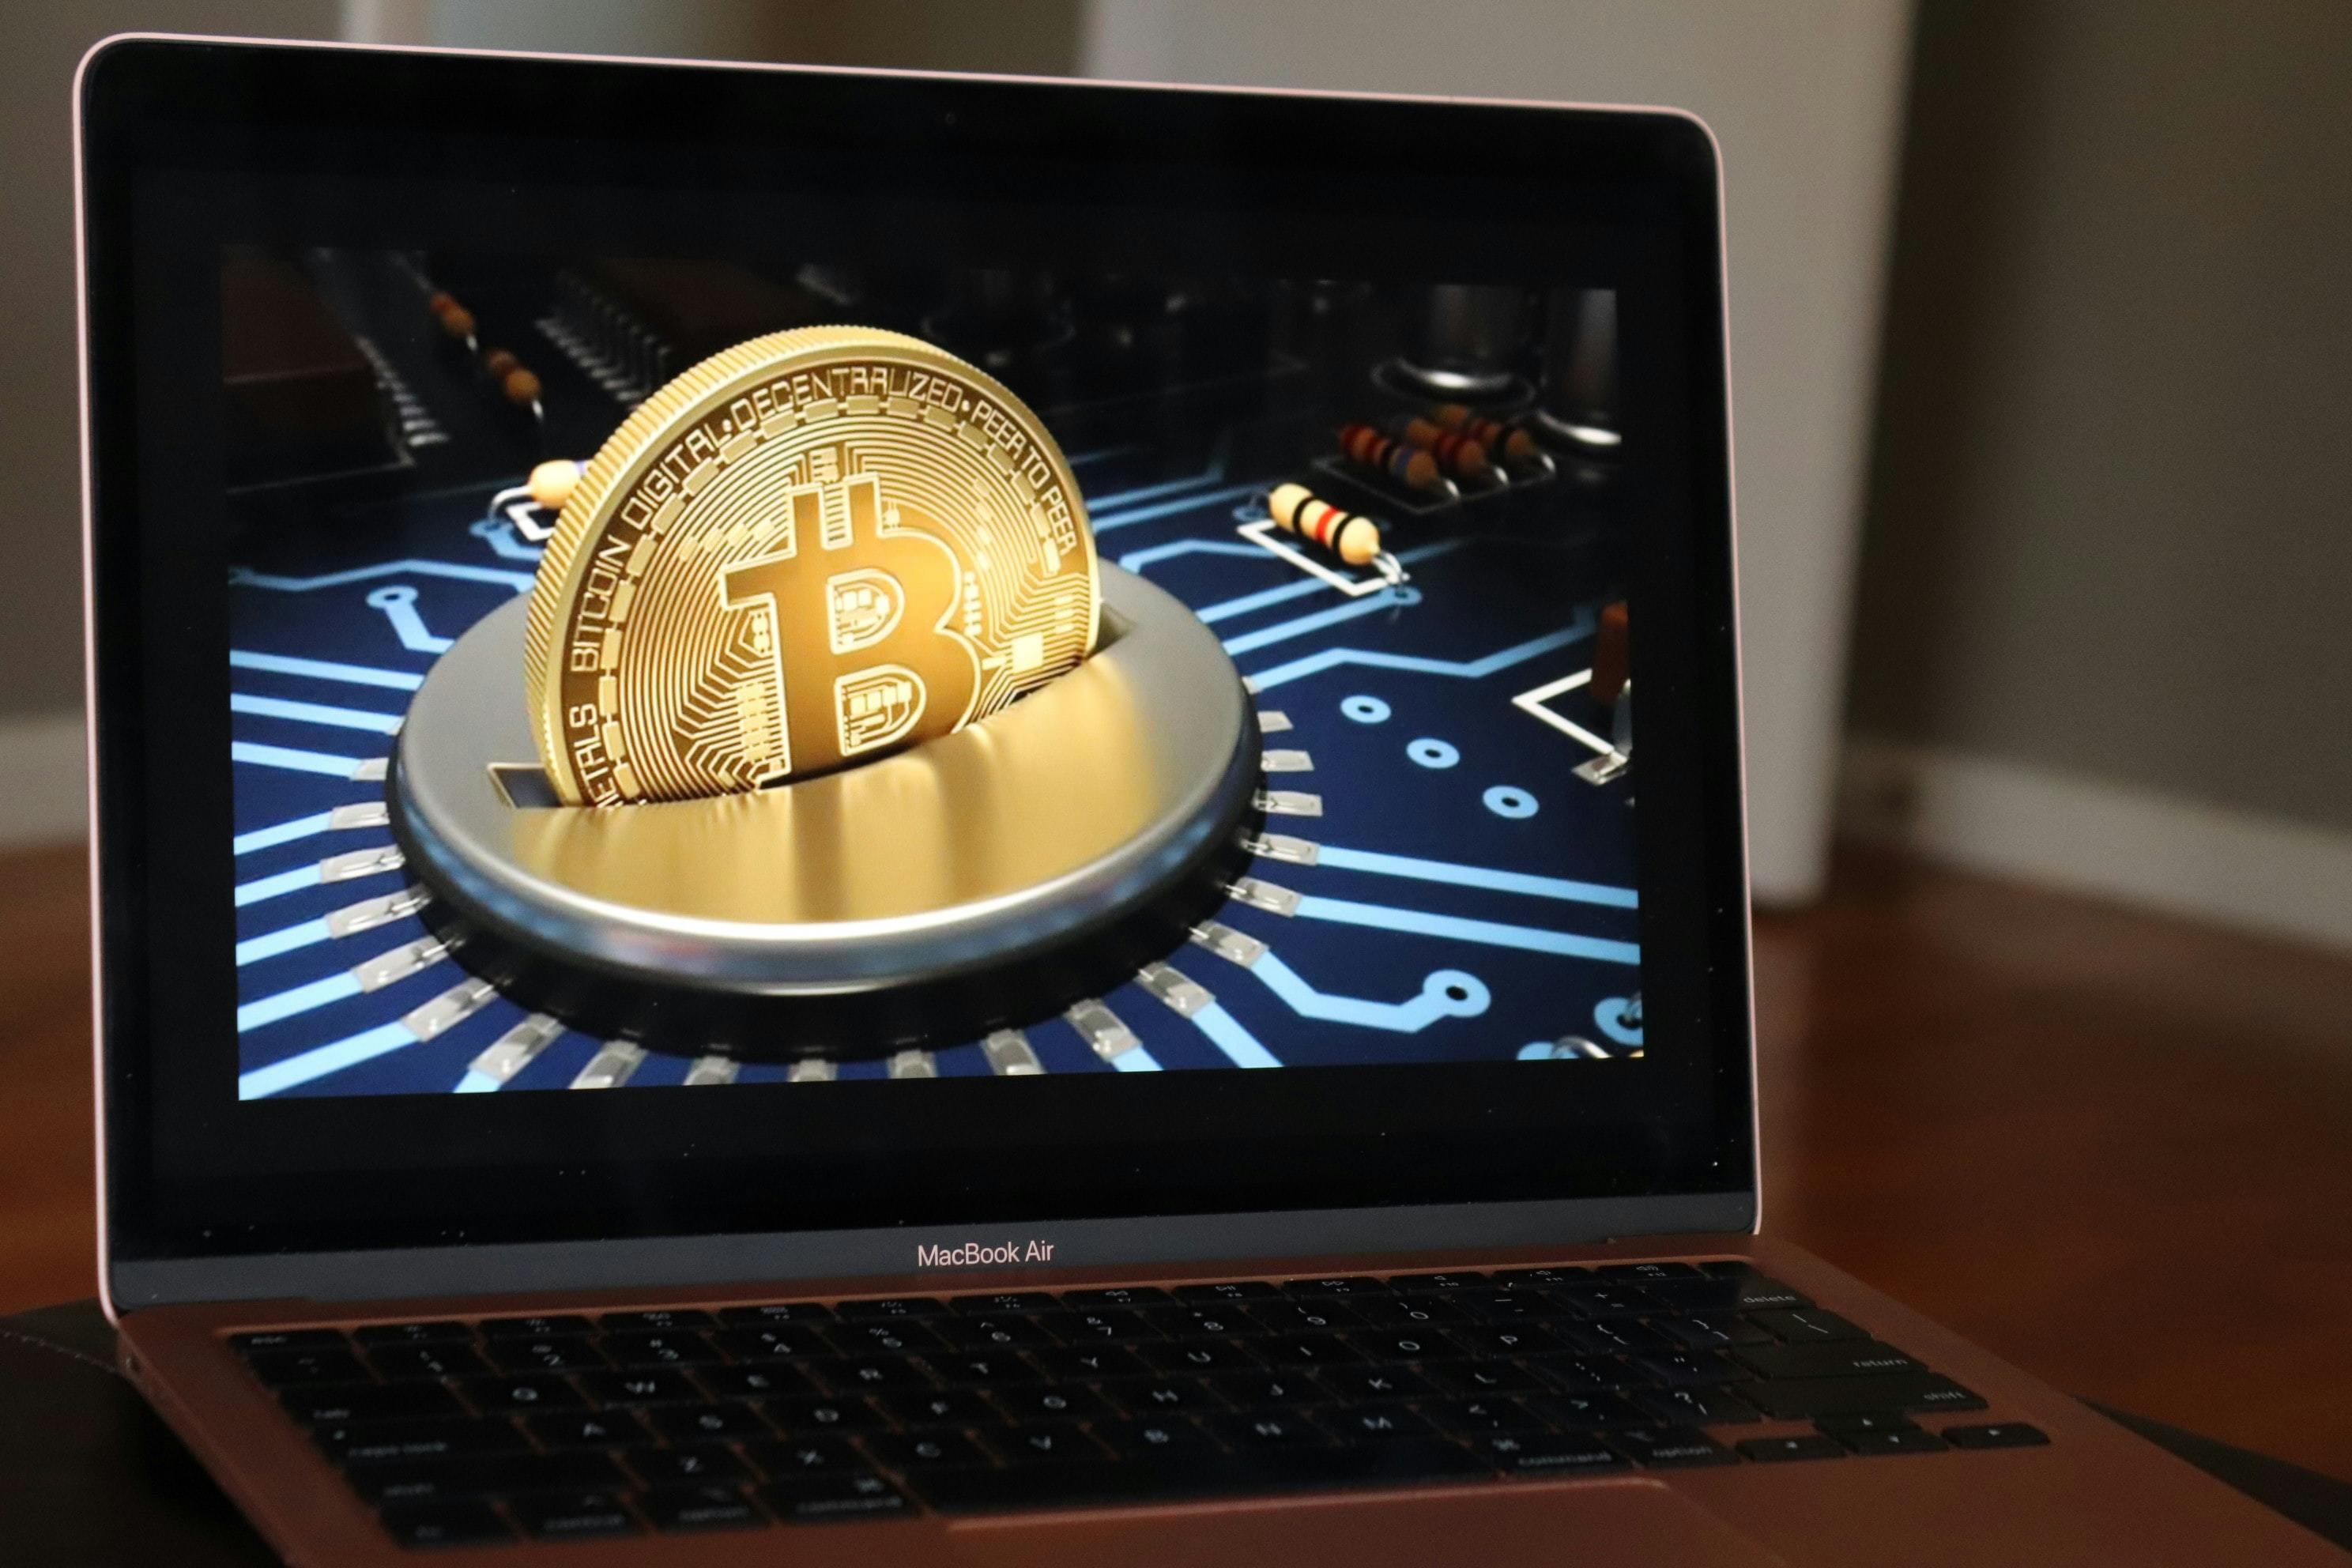 the laptop with the gold coin.